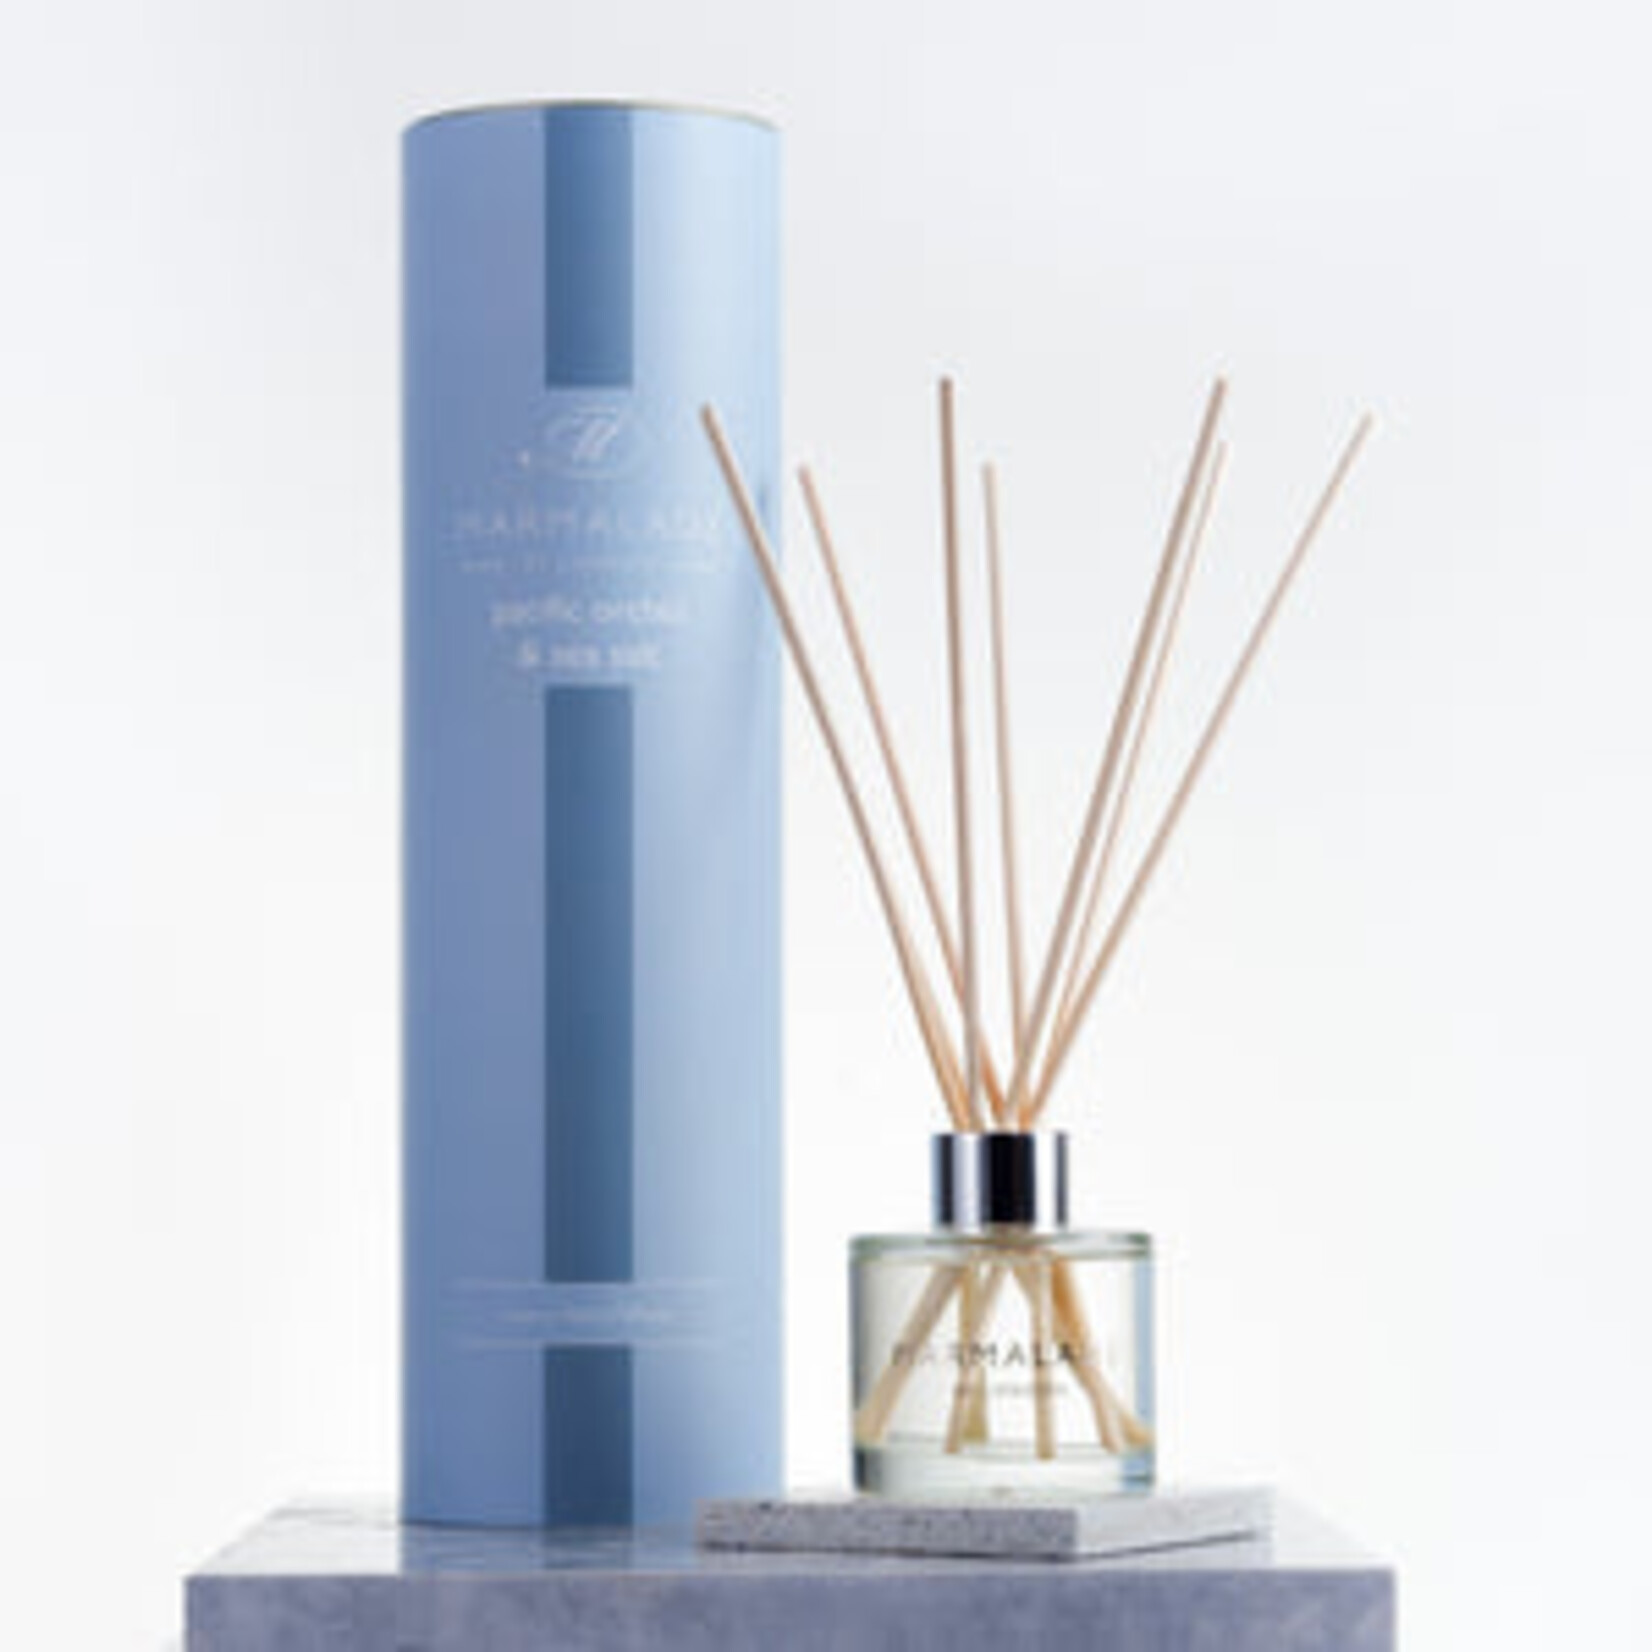 Marmalade of London Pacific Orchid and Sea Salt Diffuser